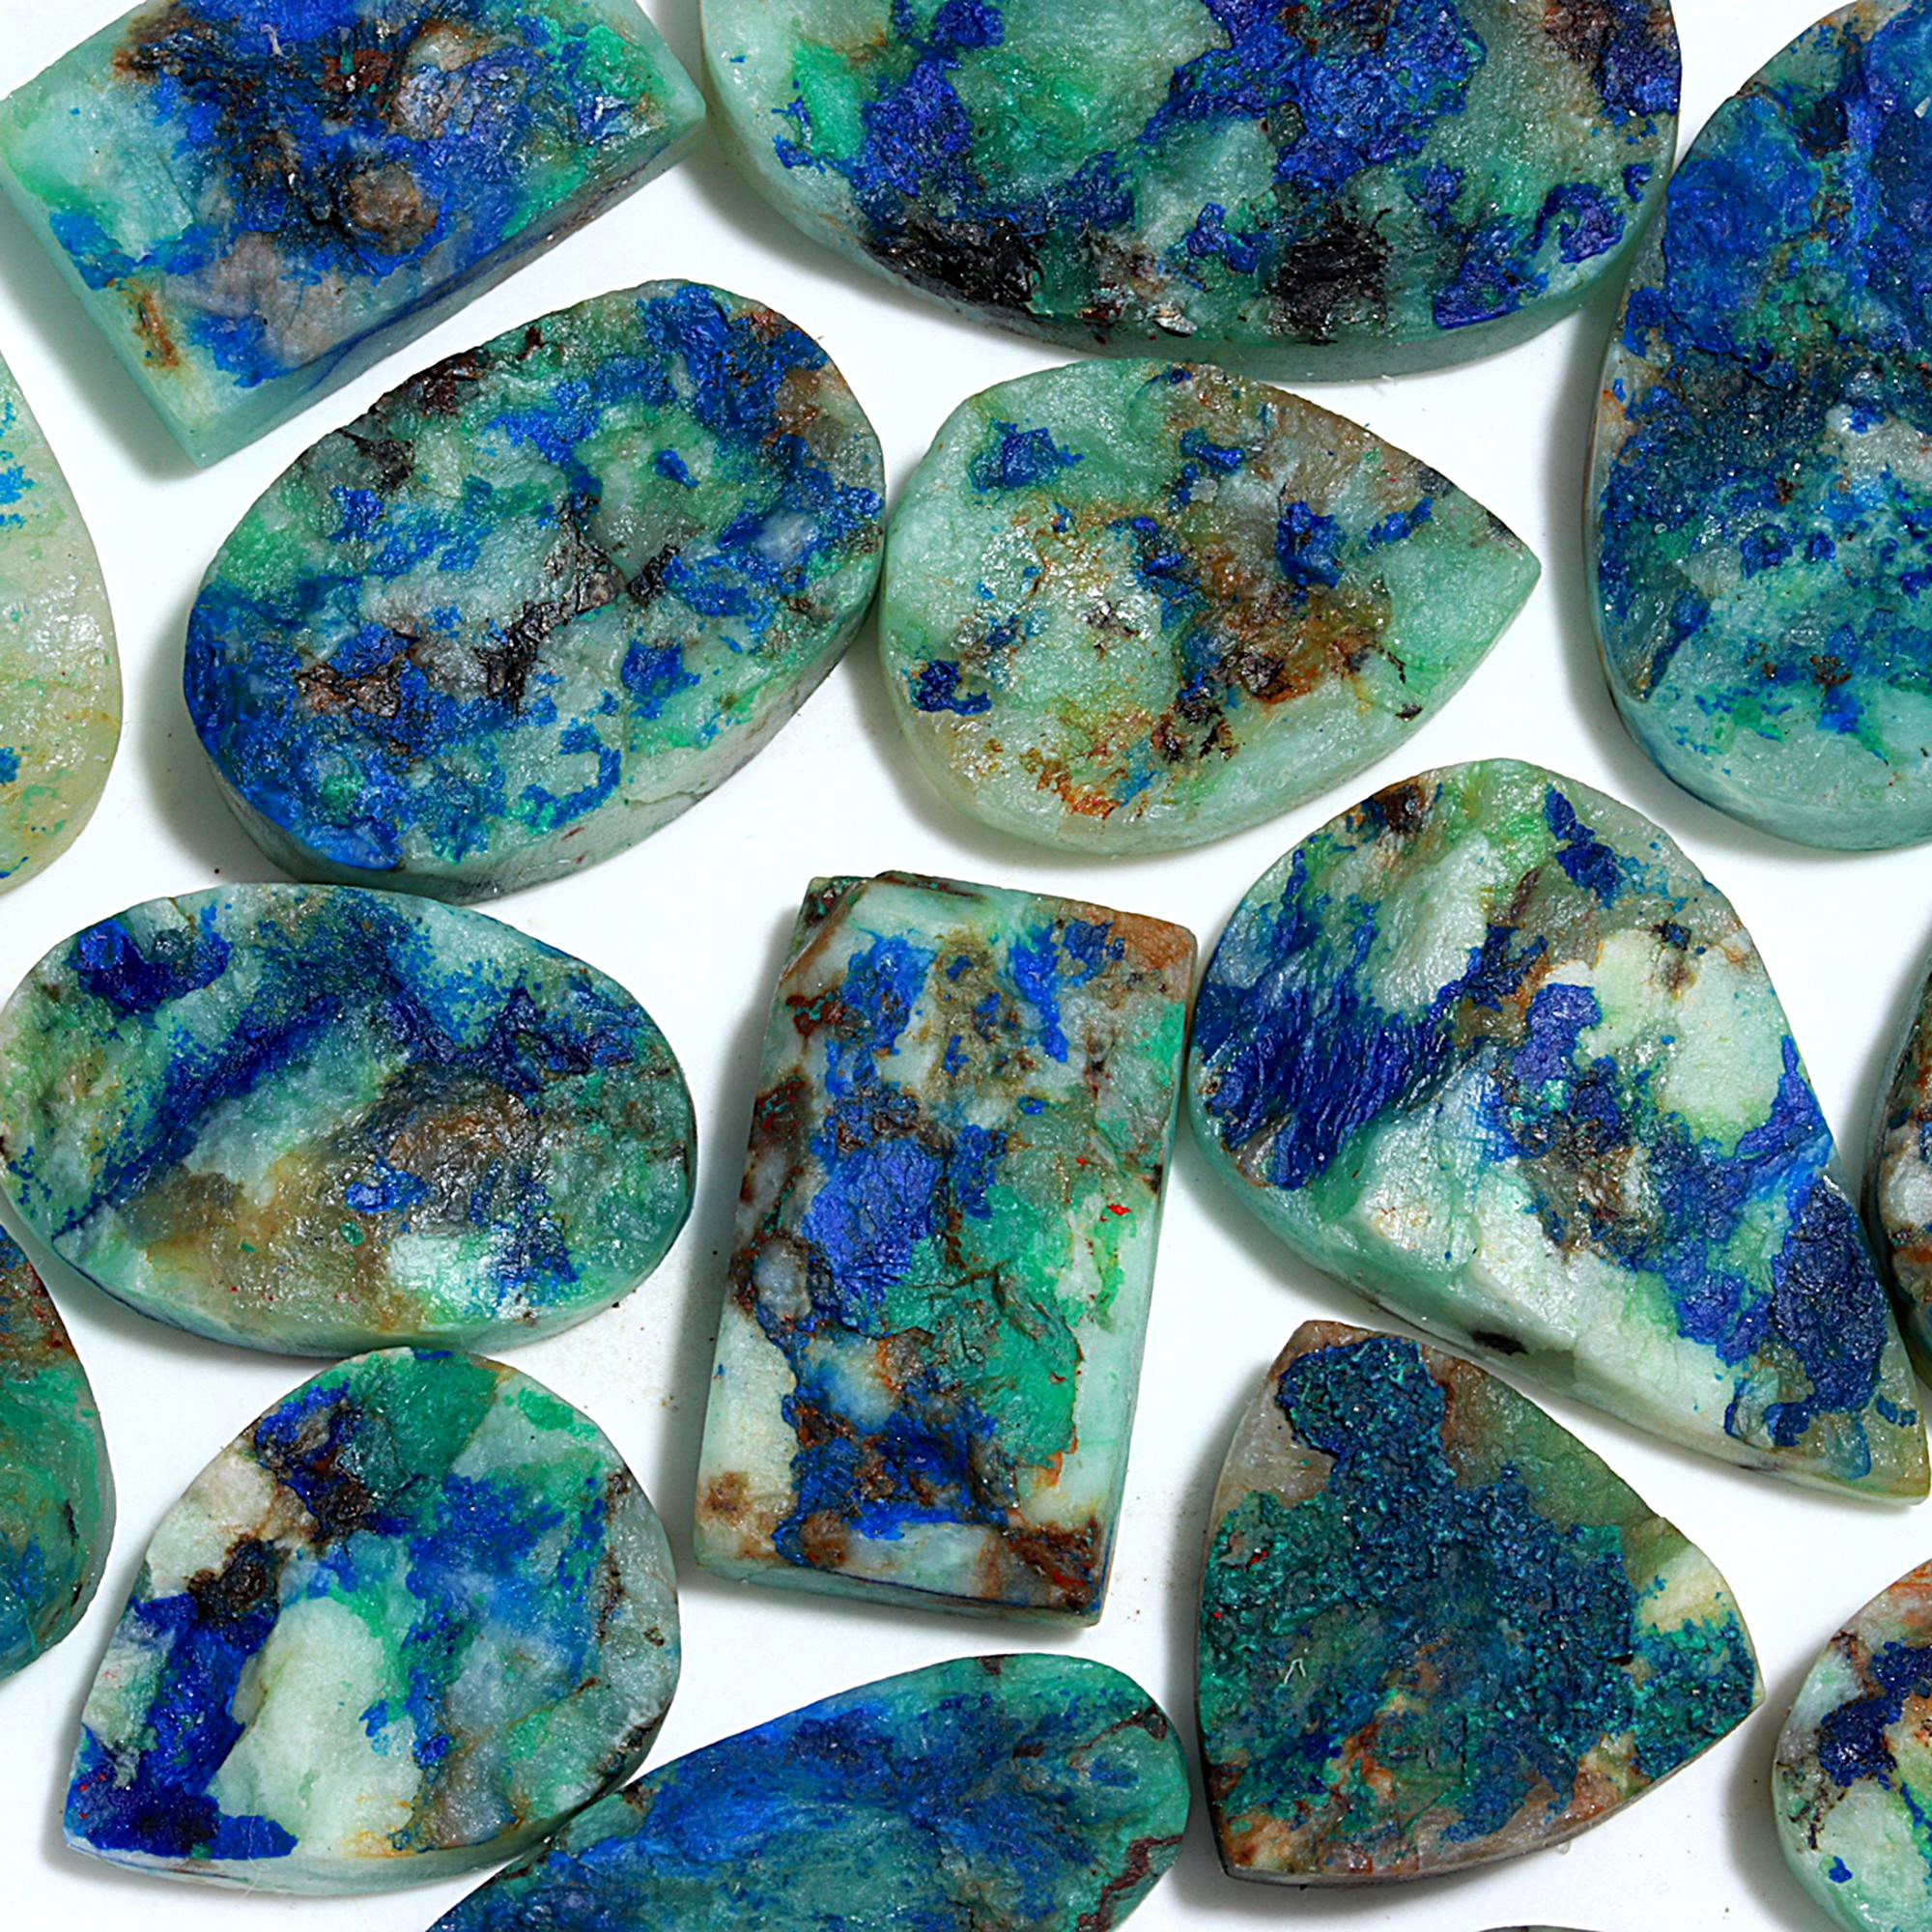 17 Pcs 582.Cts Natural Azurite Druzy Unpolished Loose Cabochon Gemstone For Jewelry Wholesale Lot Size 40x25 22x23mm#1168